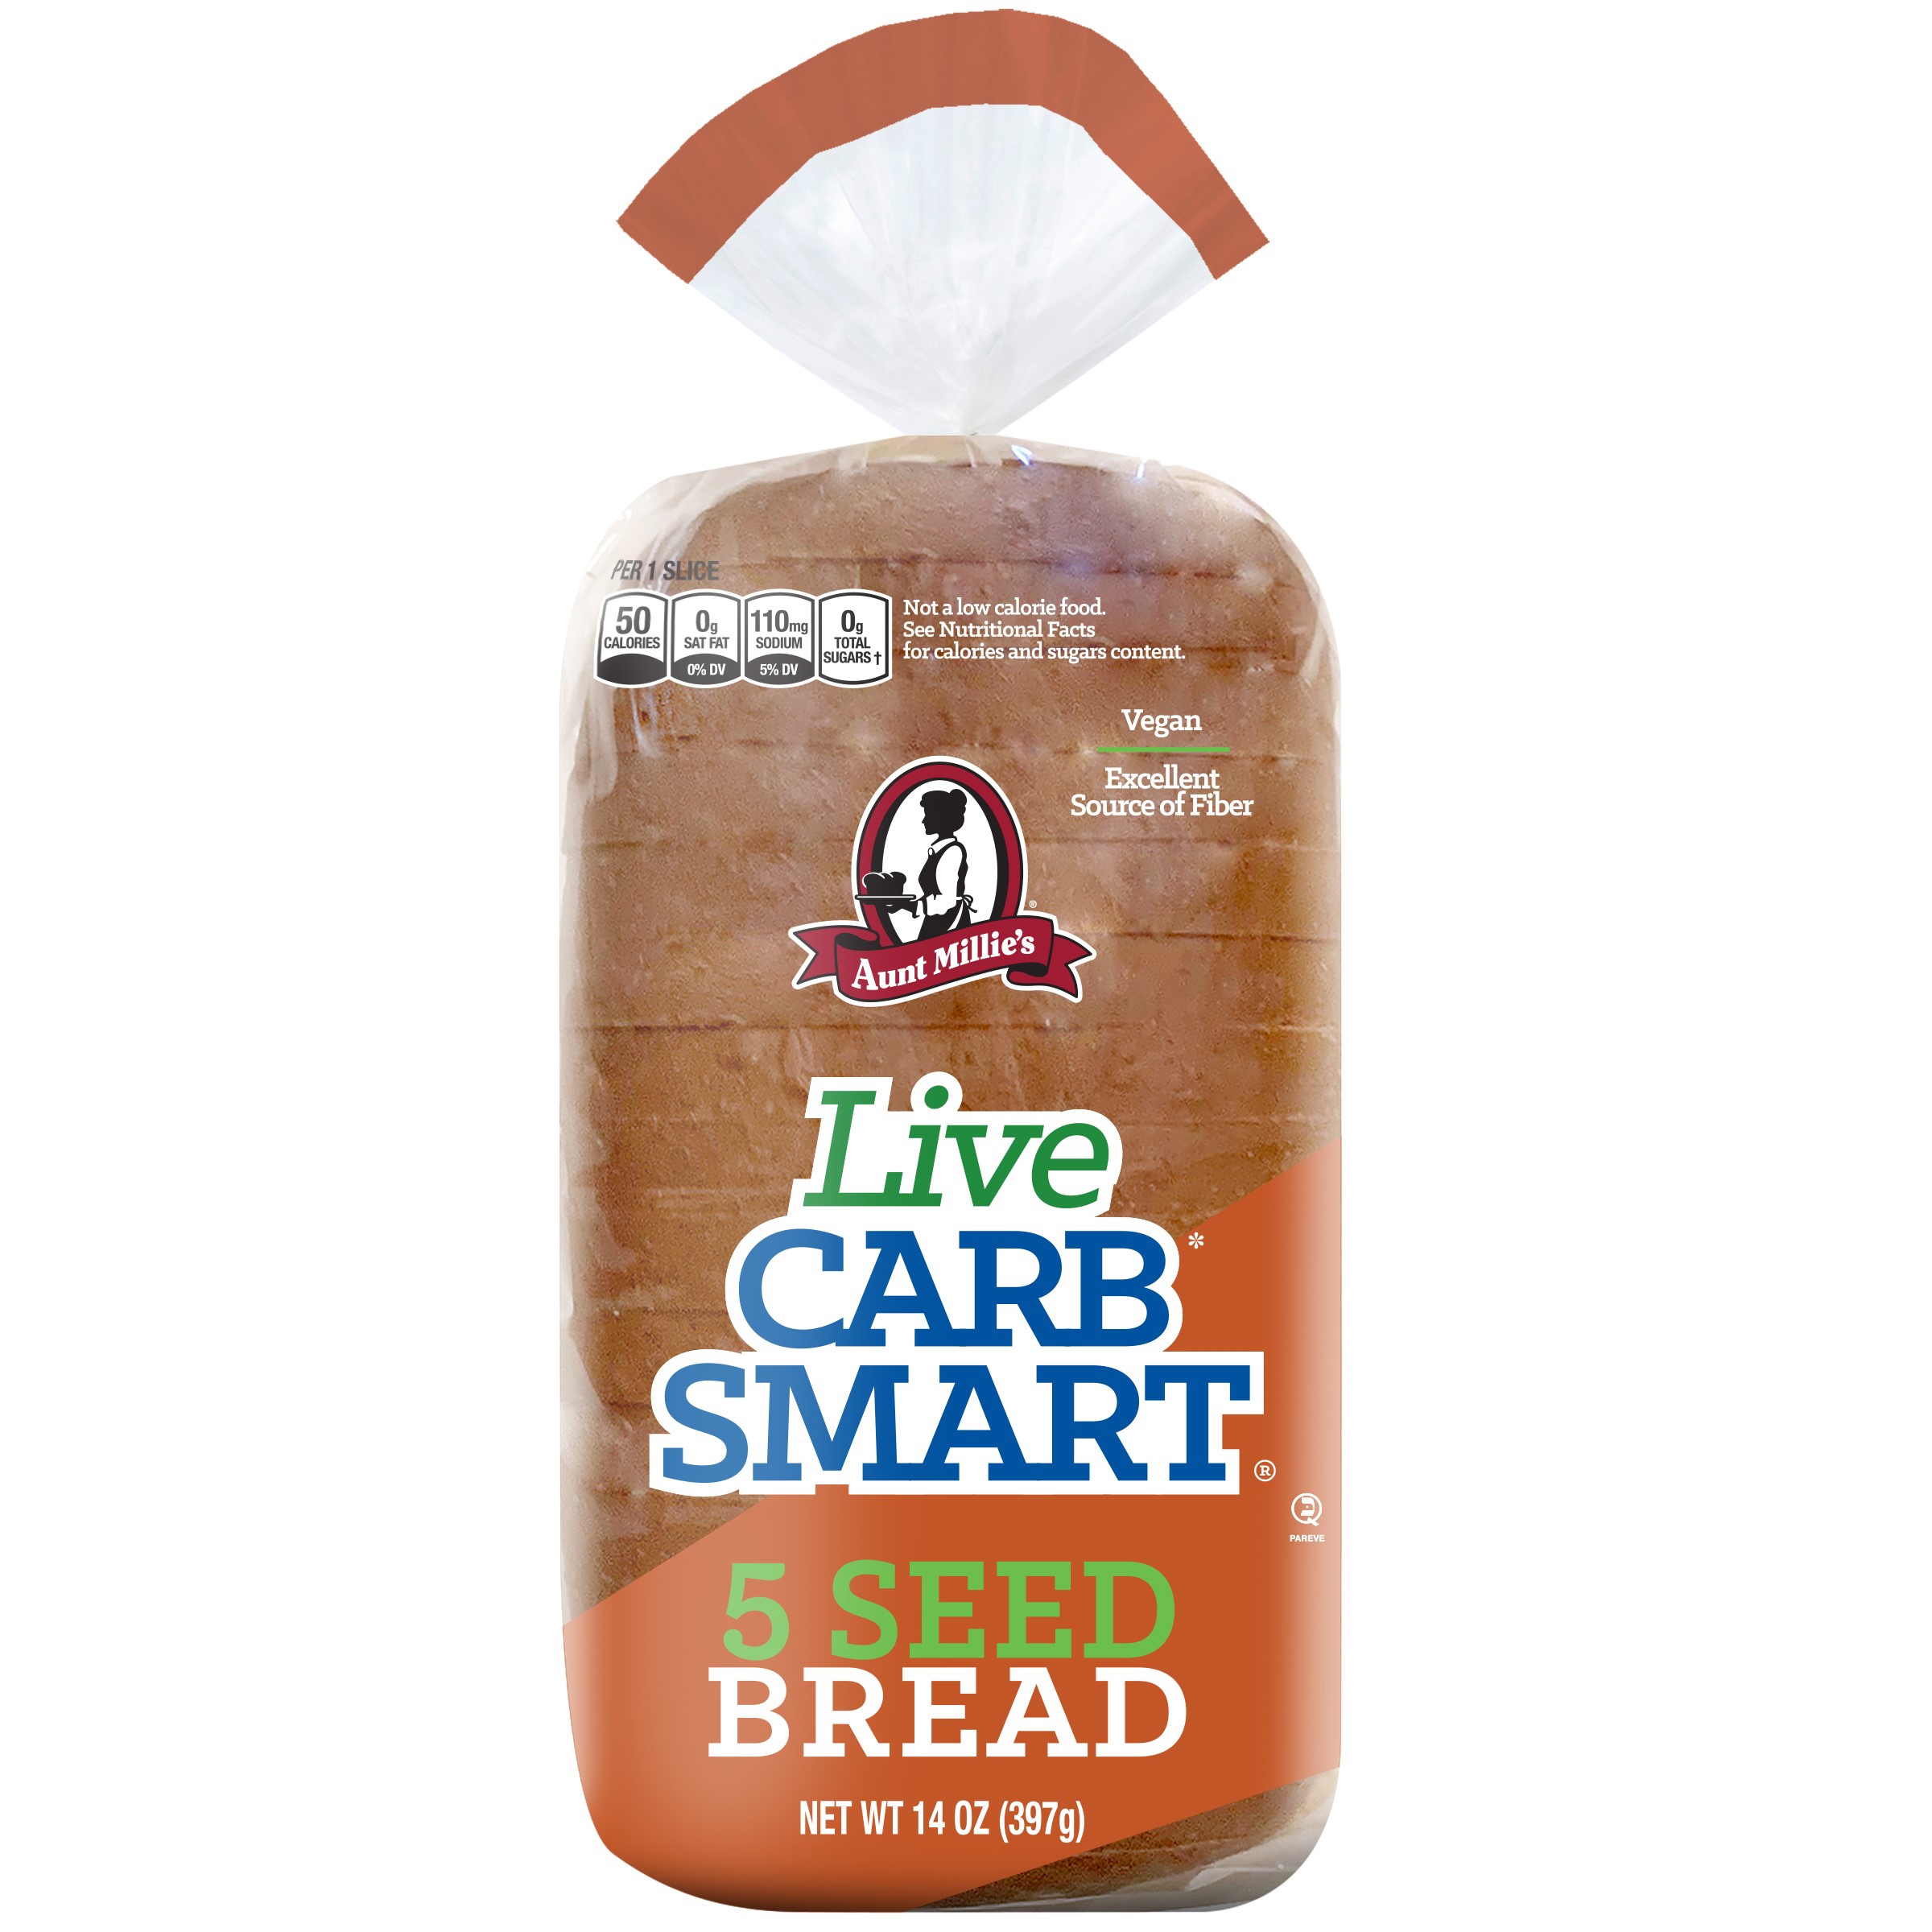 Carb Smart 5 Seed Bread